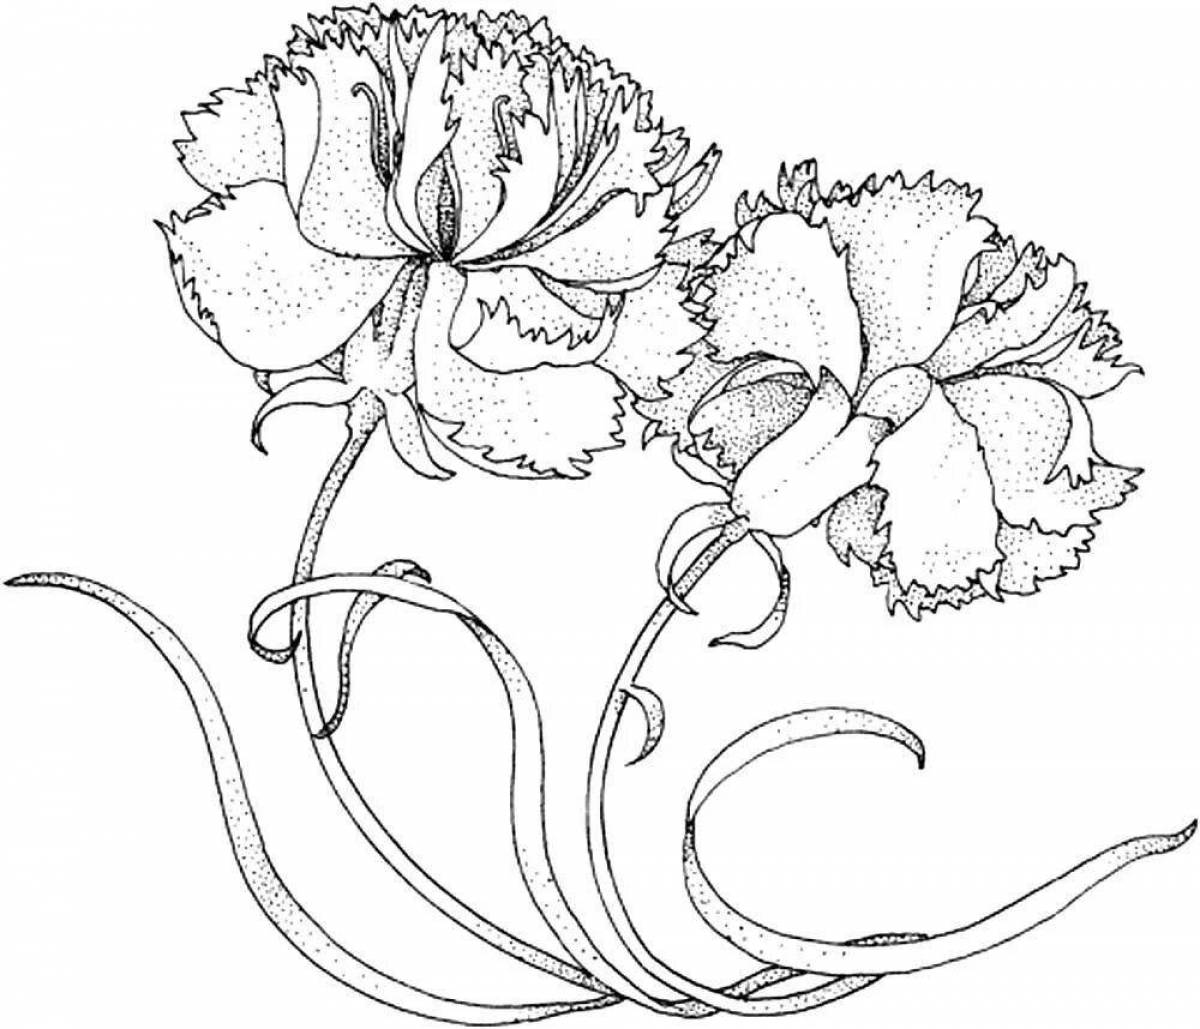 Glorious carnation flower coloring book